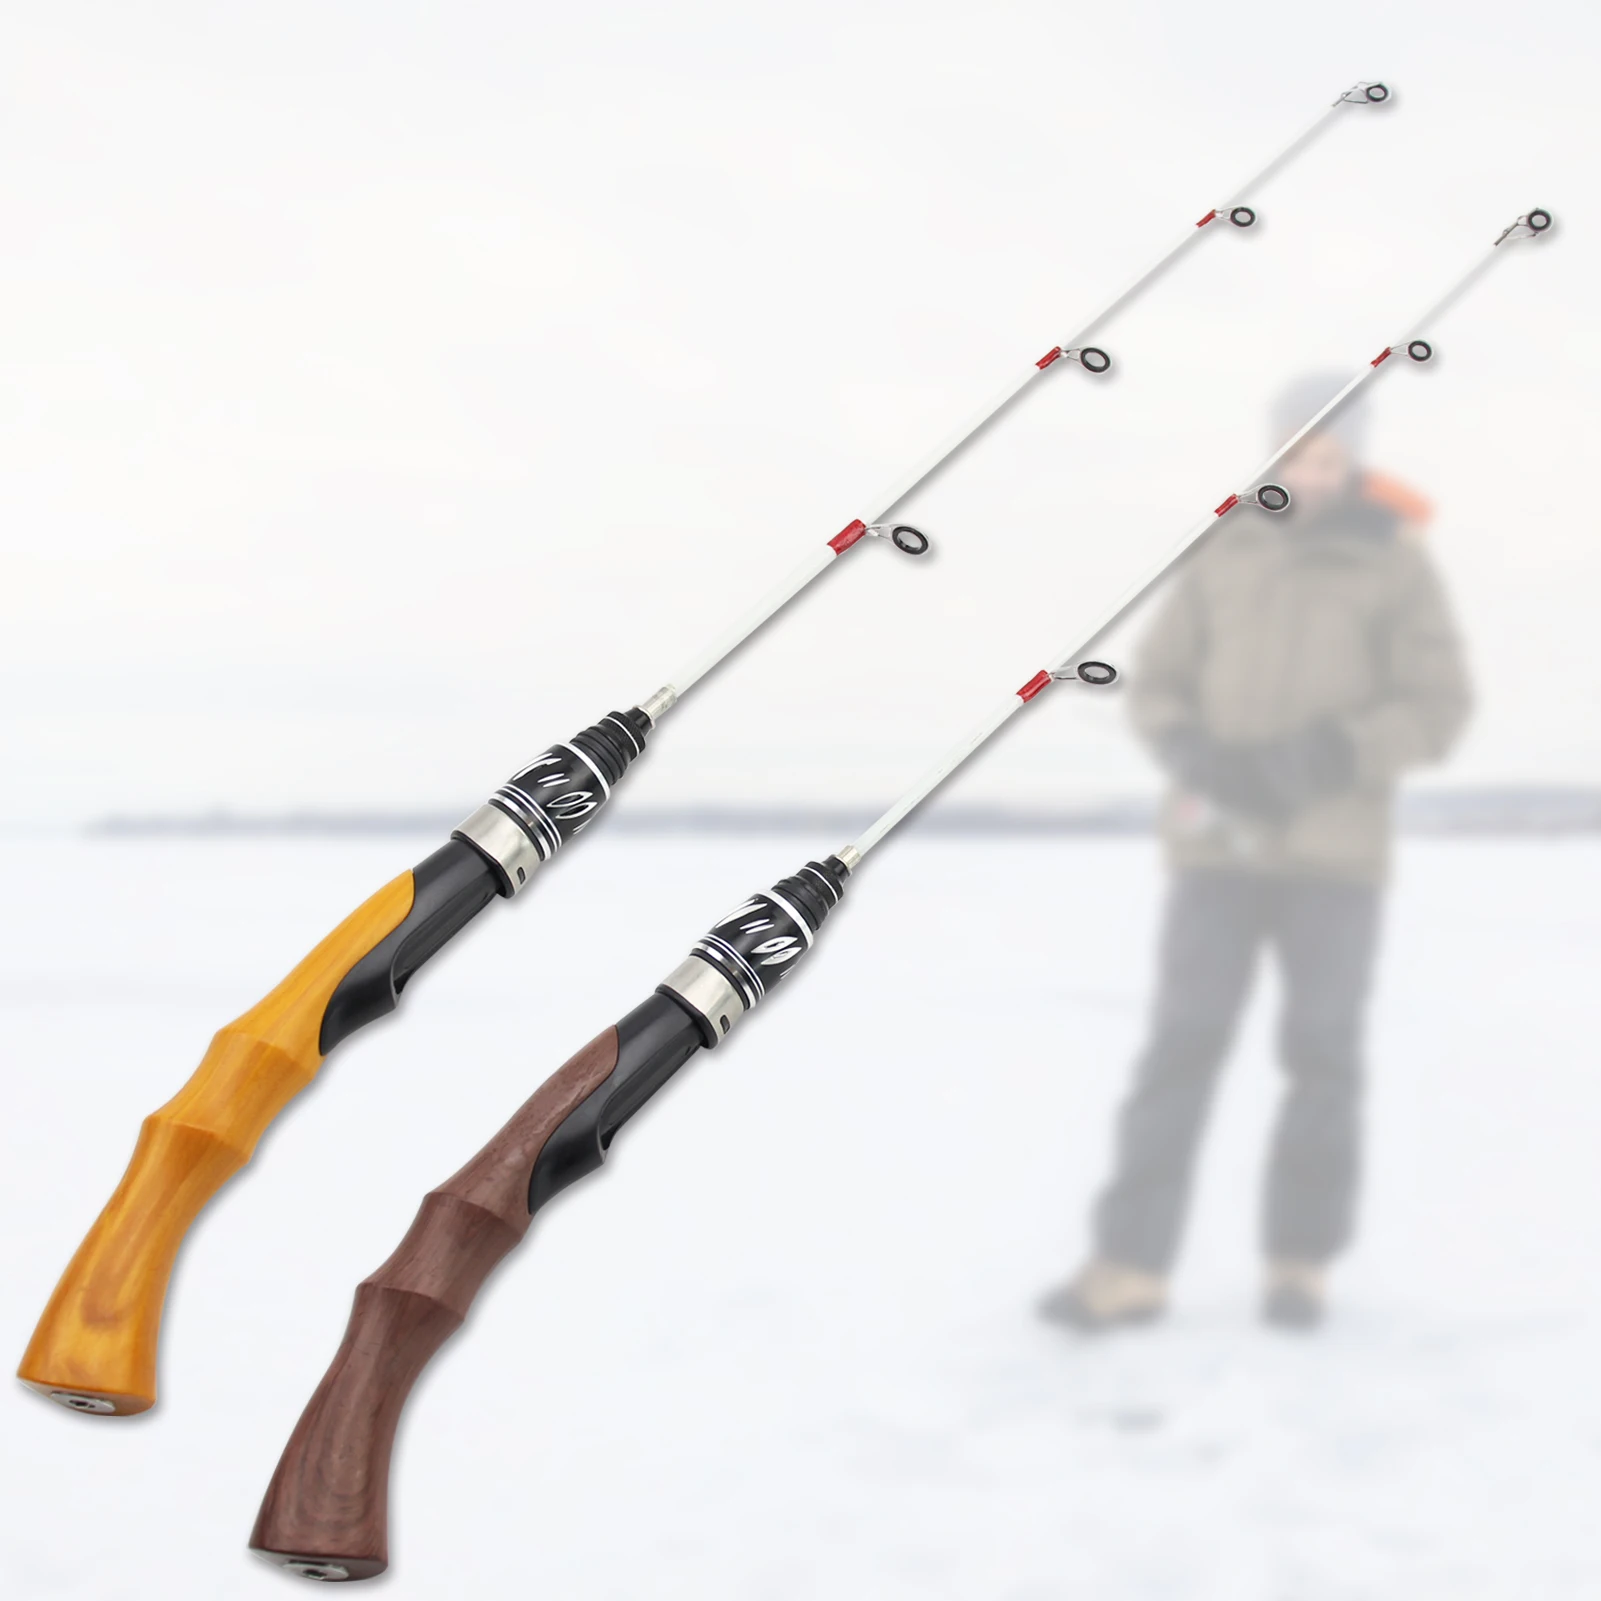 NEW 62cm Ice Fishing Rod Winter Fishing Pole Fishing Rod blue Silver Golden Spinning outdoor Handle bent Soft tips carp rod